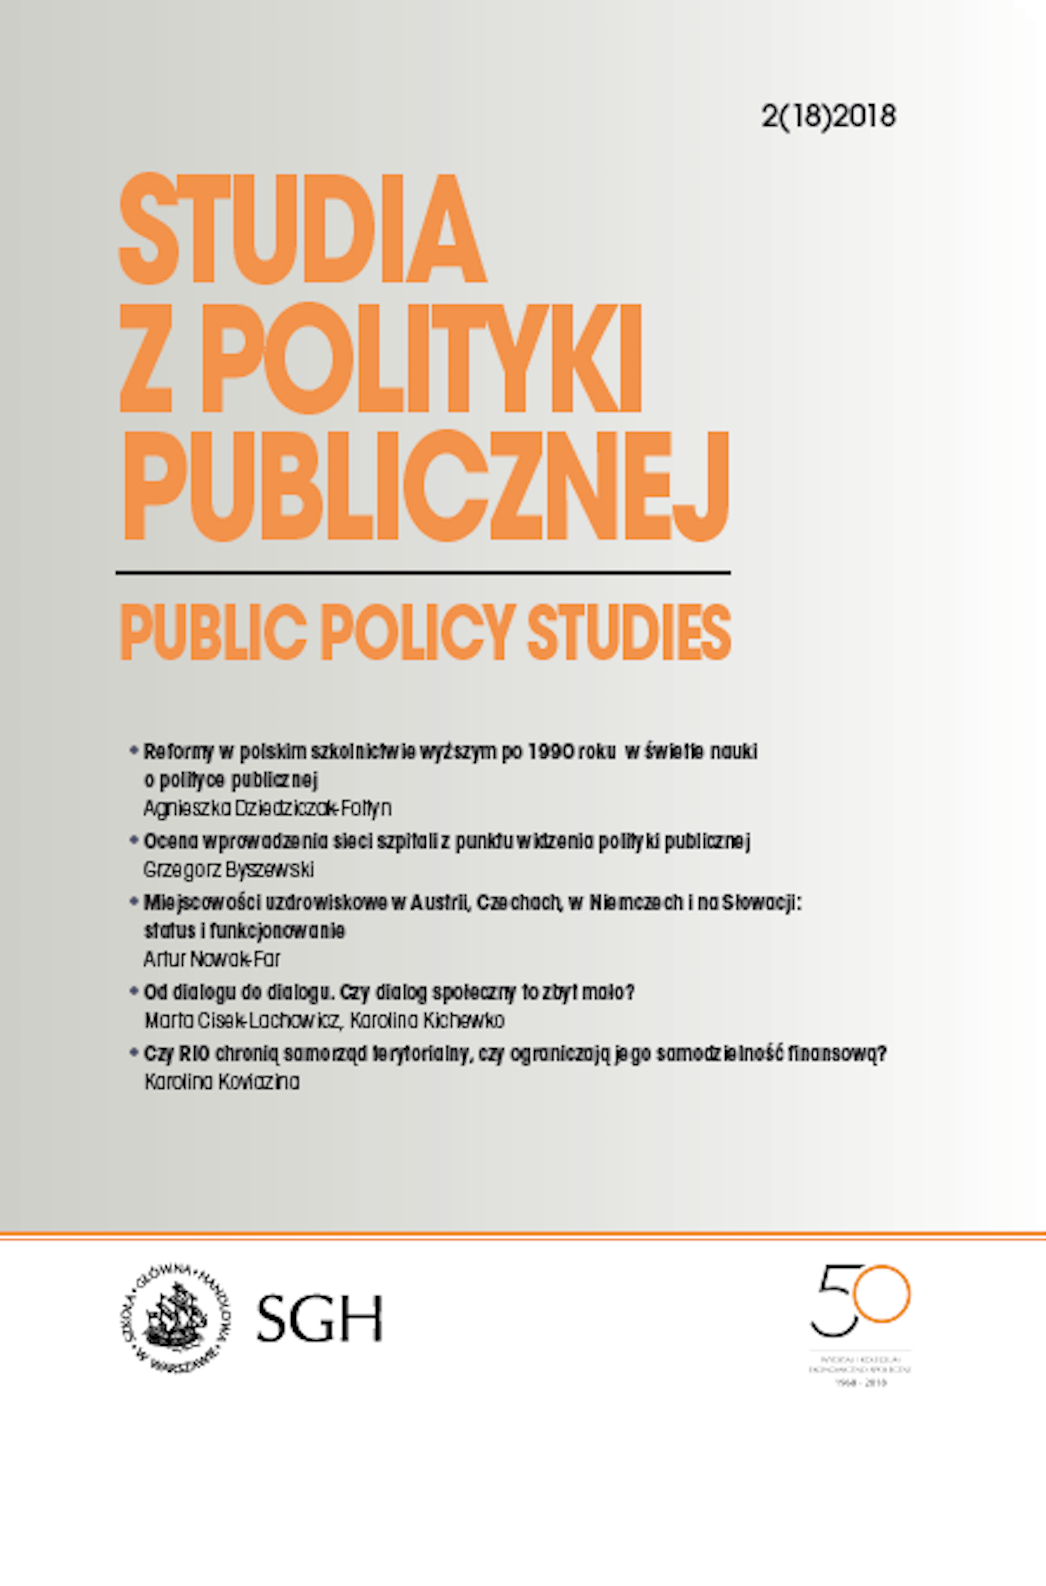 Foreign policy of the Slovak Republic towards challenges in the eastern policy of the European Union Cover Image